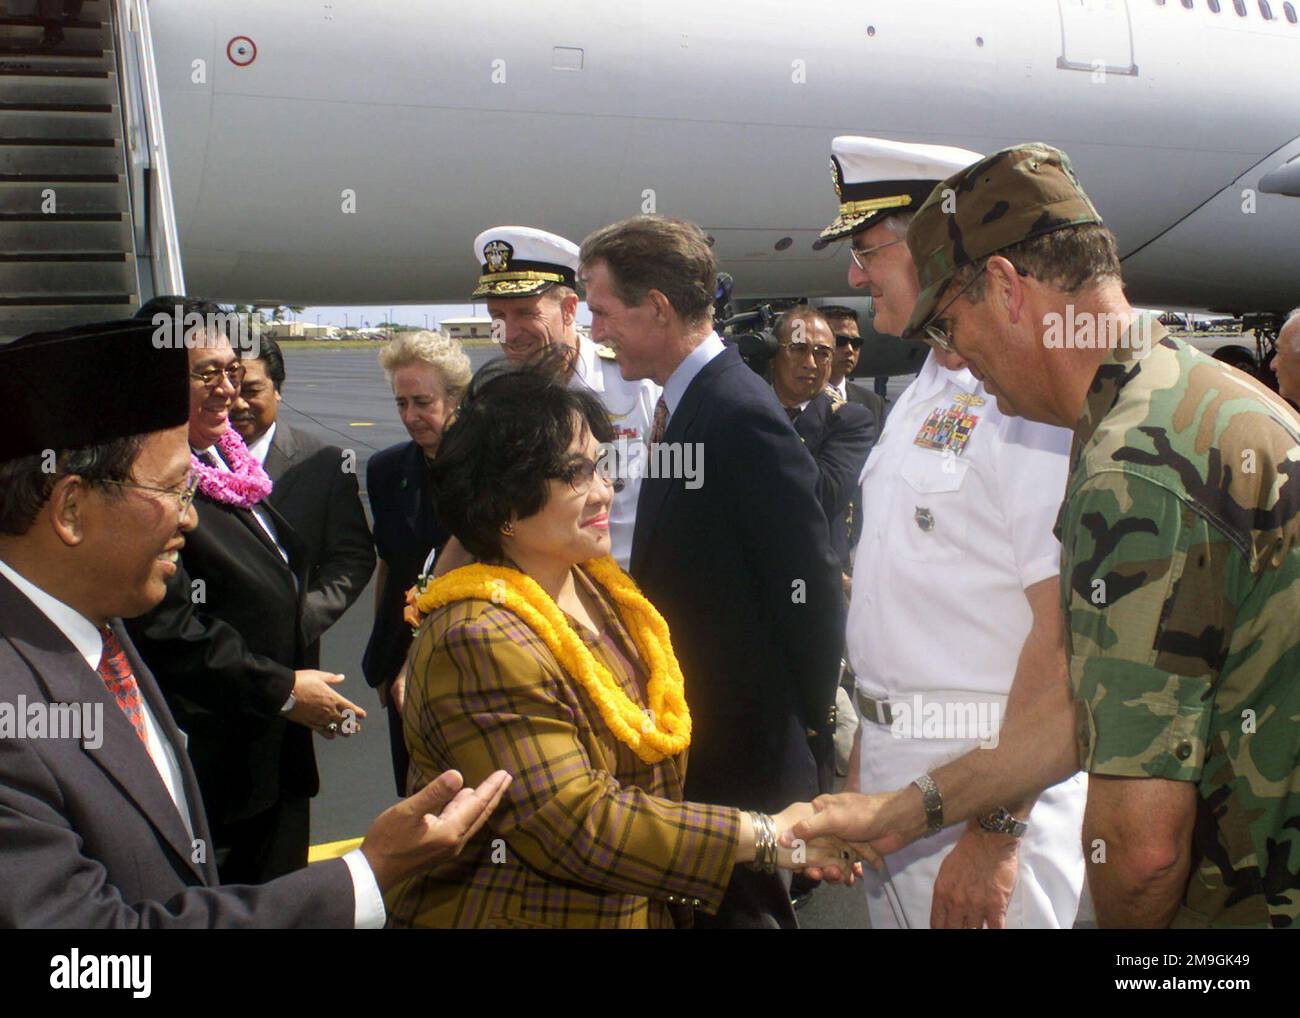 President of Indonesia, Megawati Sukarnoputri greeted by Colonel John West, 15th Air Base Wing Vice Commander, upon her arrival at Hickam Air Force Base, Hawaii. President Megawati stopped at Hickam to refuel her aircraft. She is enroute to New York to address the UN General Assembly. Base: Hickam Air Force Base State: Hawaii (HI) Country: United States Of America (USA) Scene Major Command Shown: PACAF Stock Photo